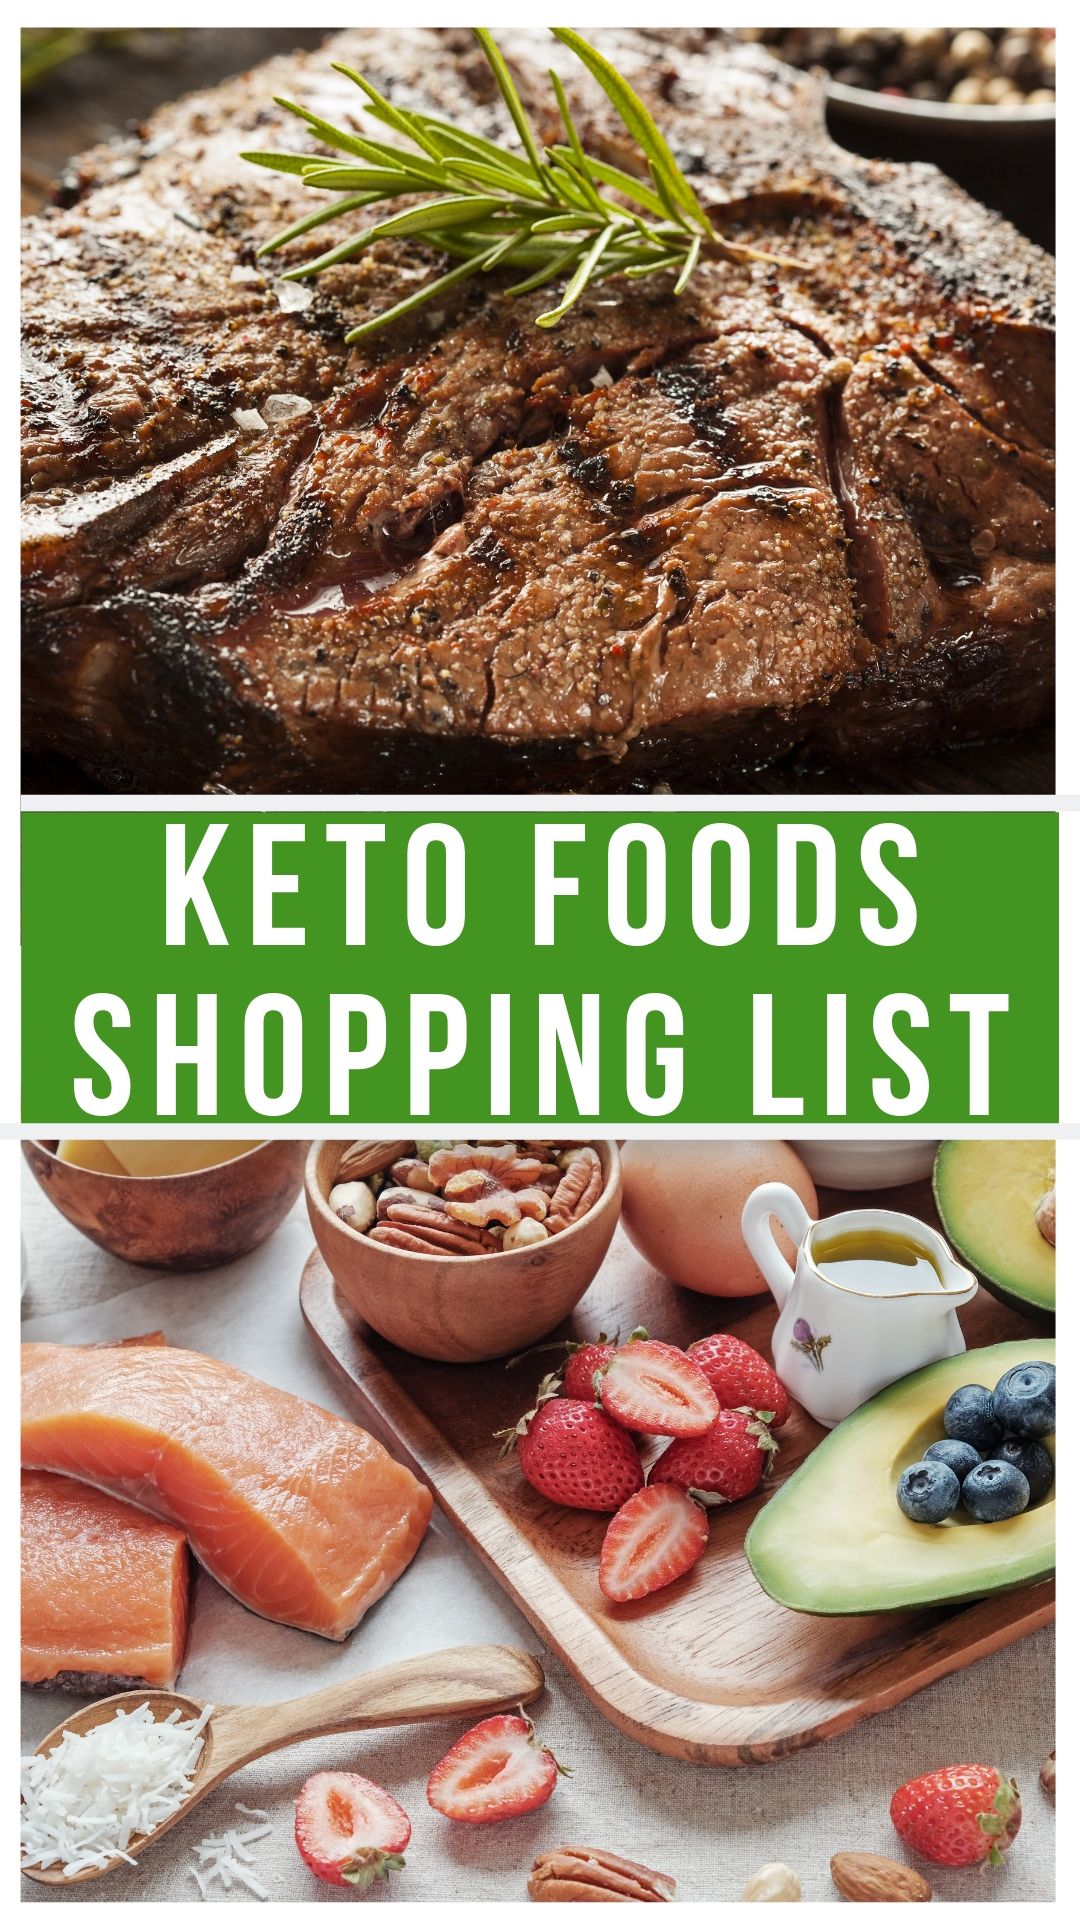 keto foods collage with steak in the top picture then a tray of low carb foods in the bottom.